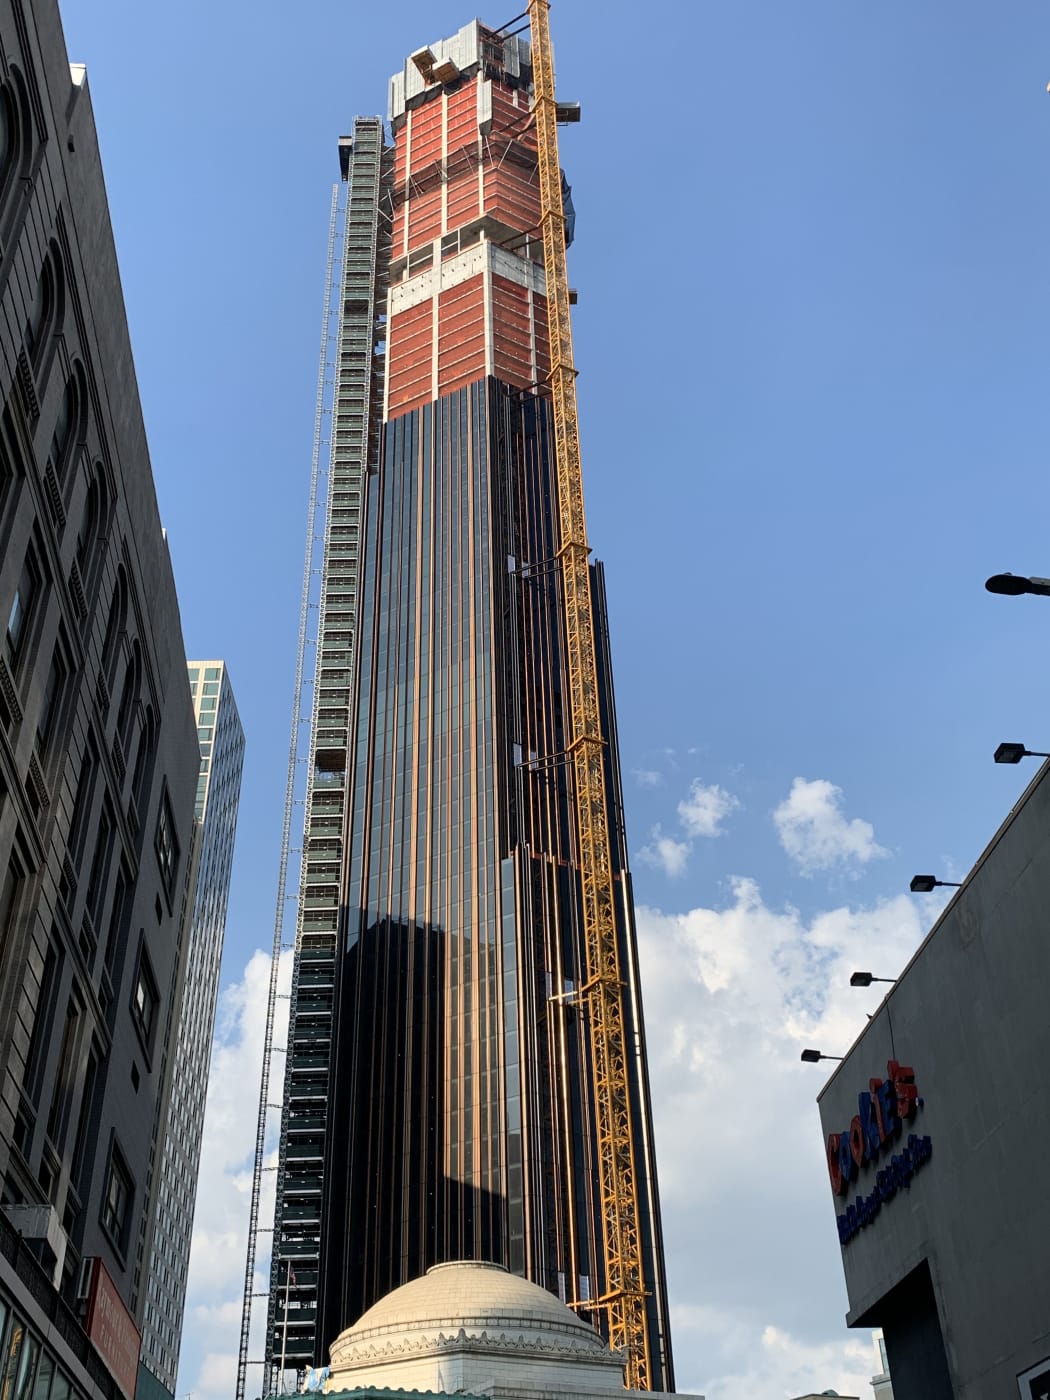 The Brooklyn Tower under construction.